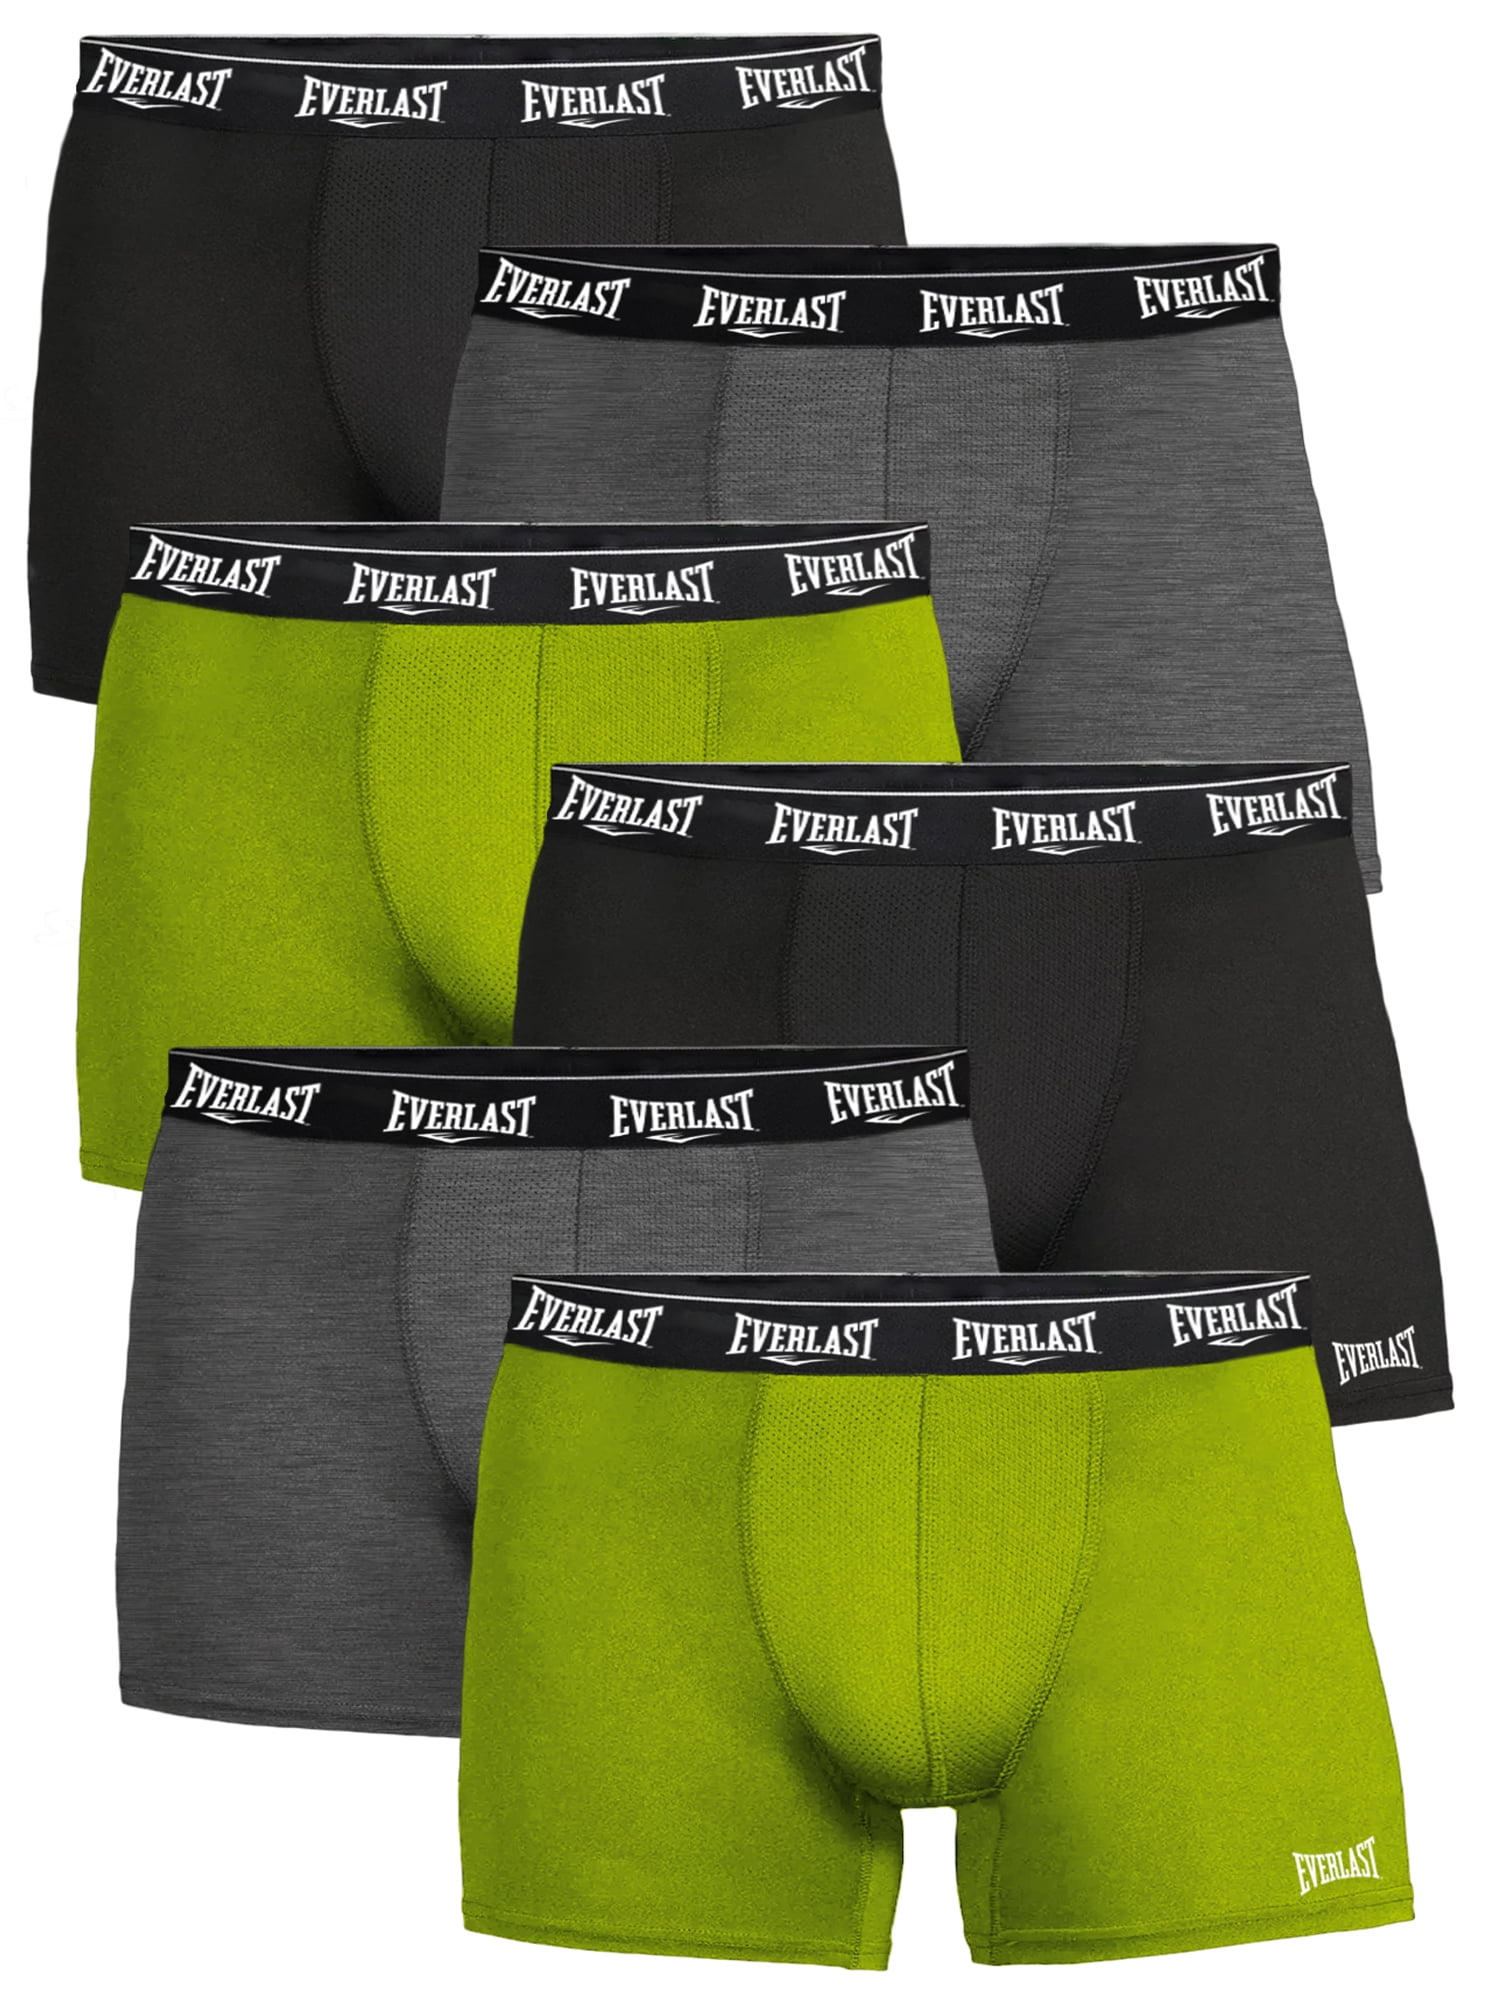 Find Your Perfect Everlast Men s Trunks Breathable Cotton Underwear ...